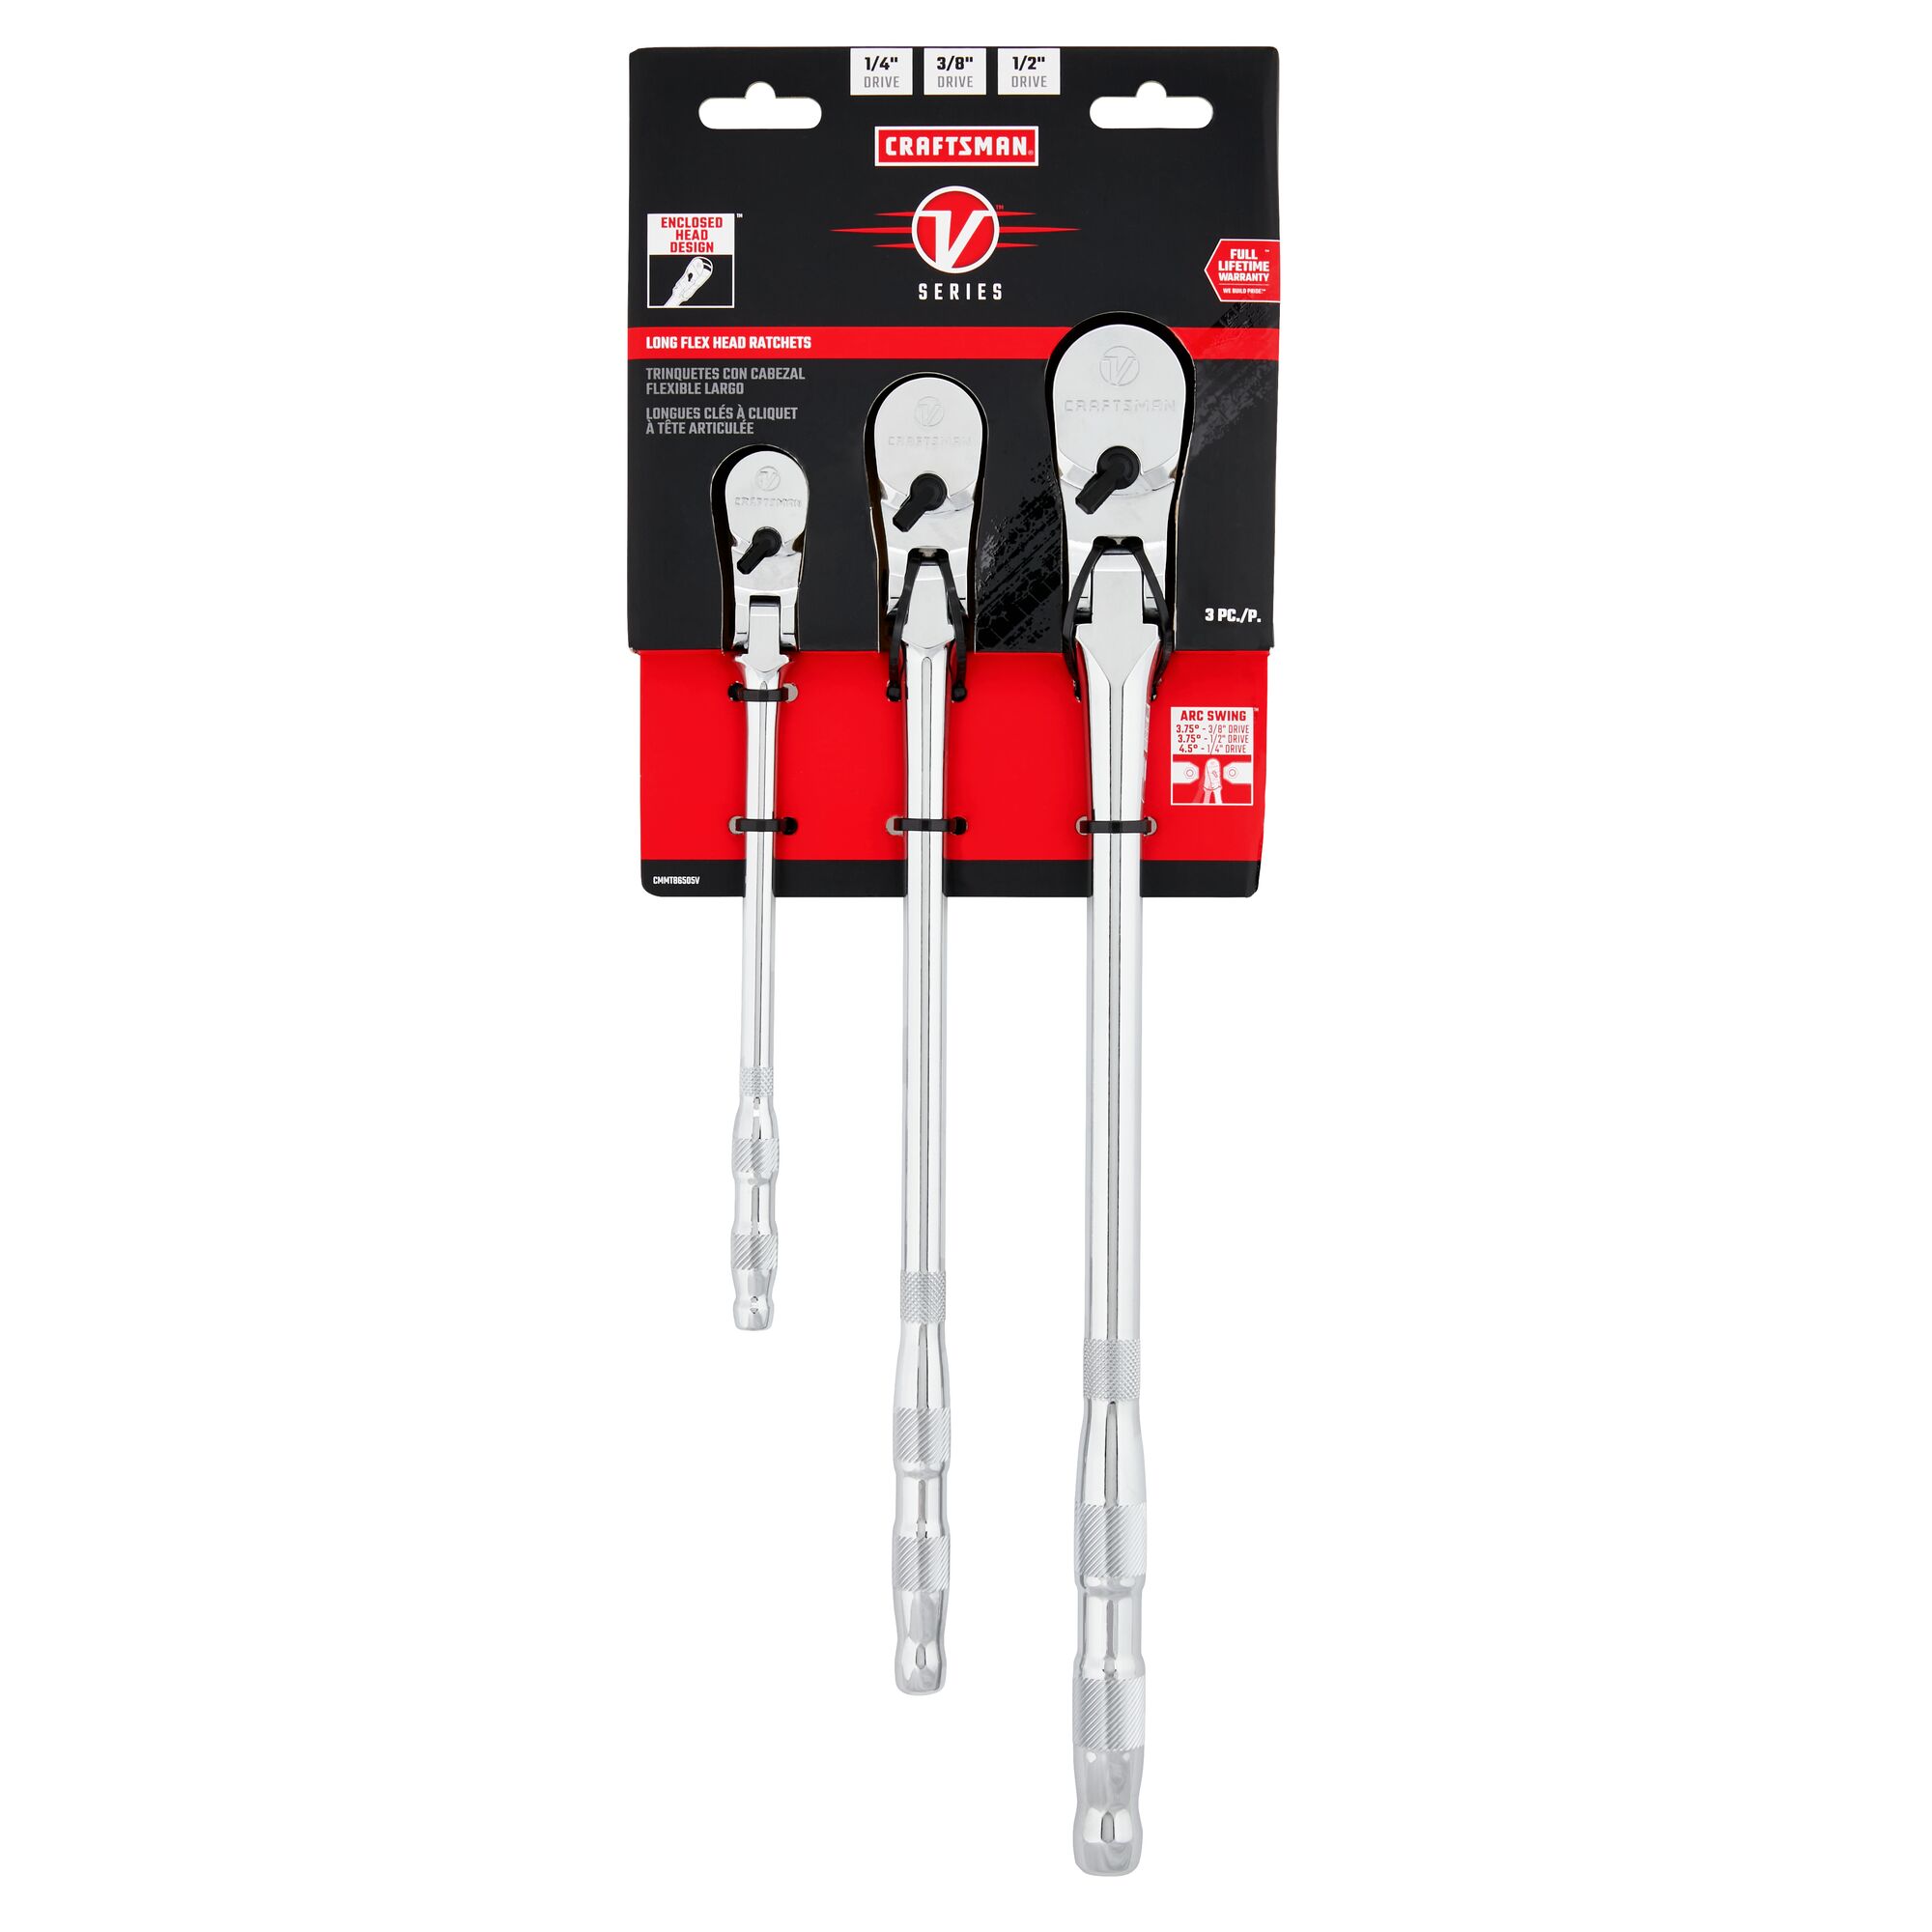 V series quarter inch three eighth inch and half inch drive long flex head ratchet in packaging. 3 pack